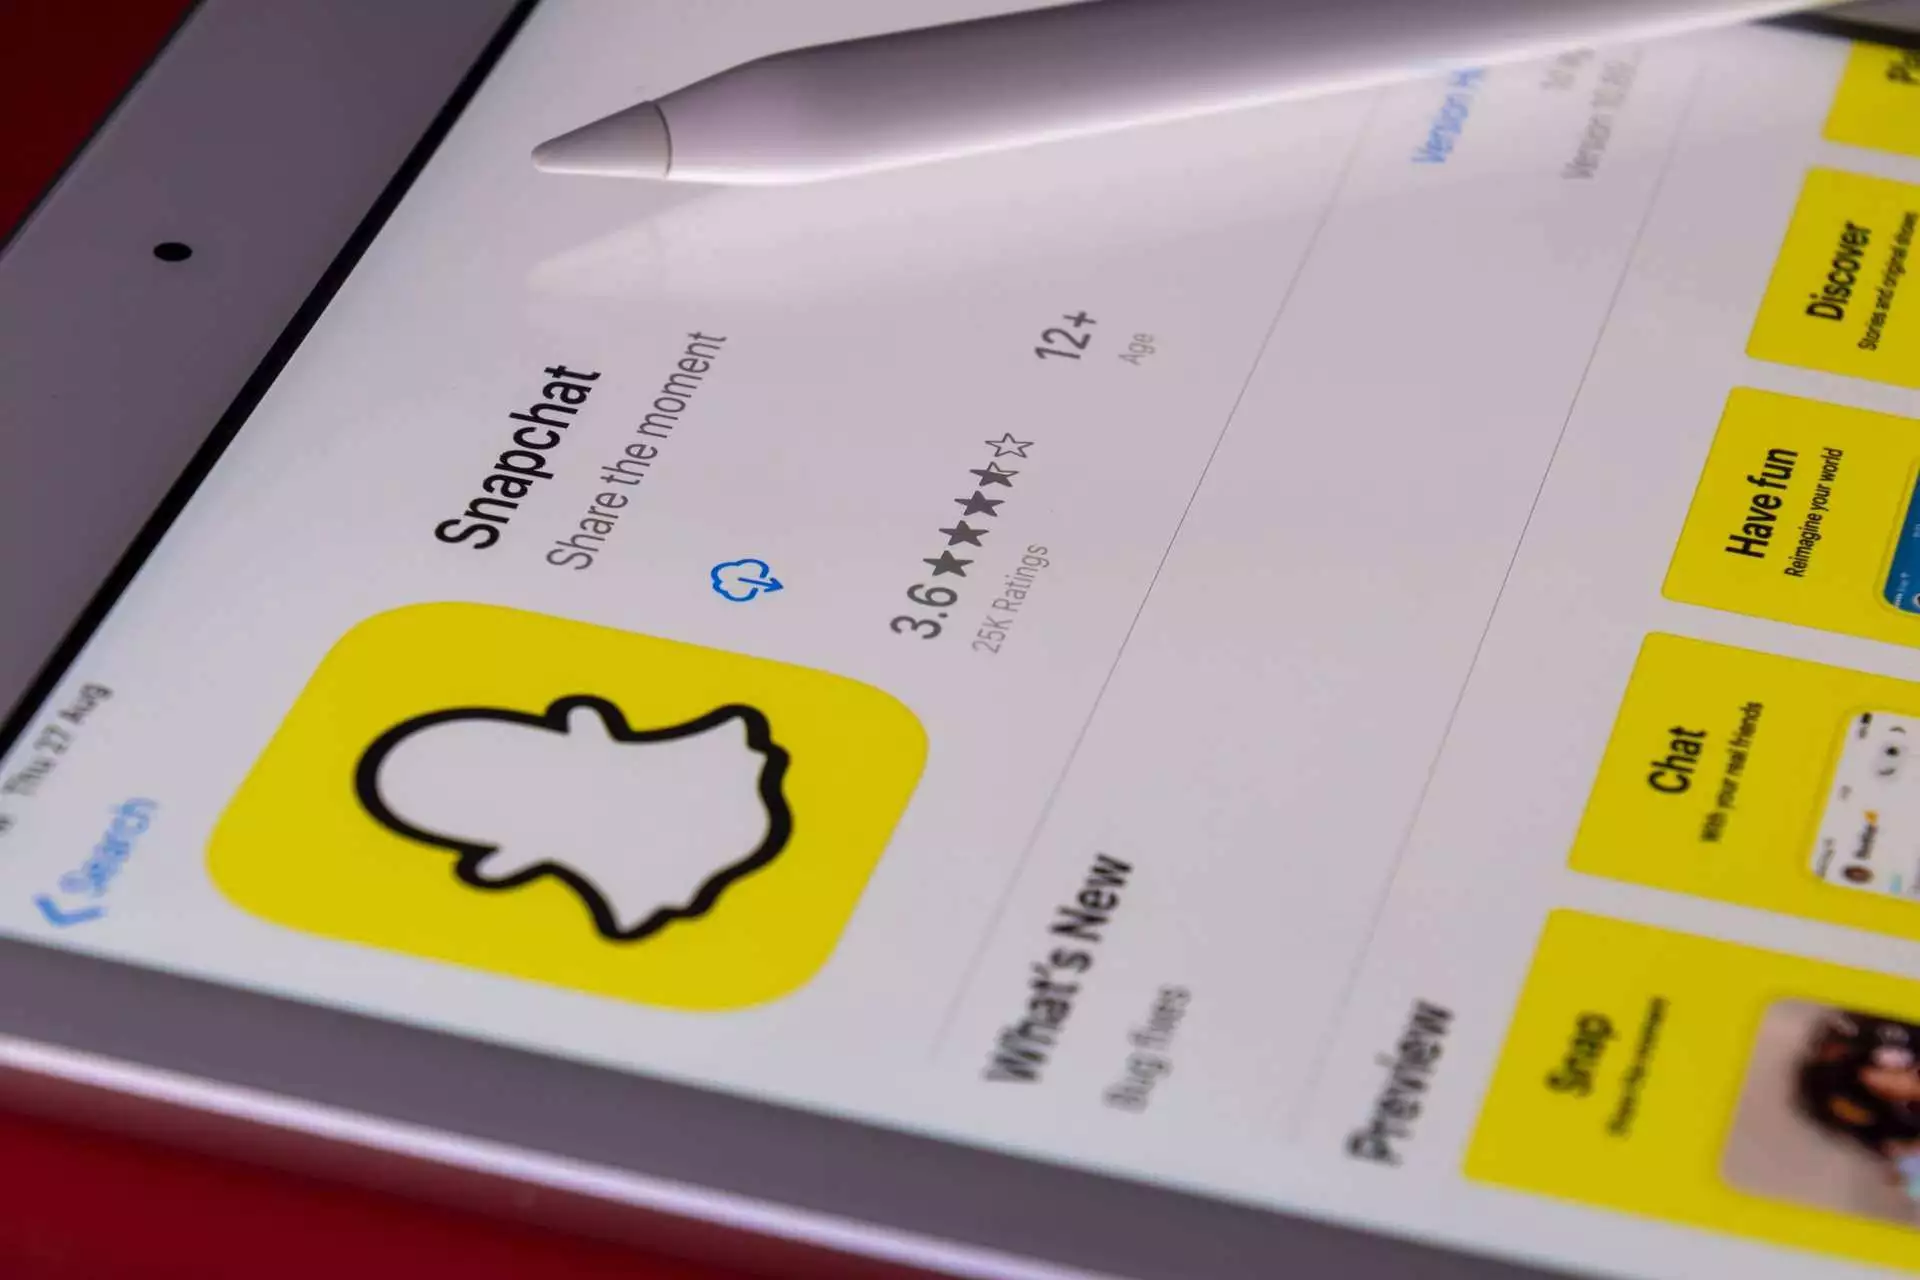 How to make a private story on Snapchat